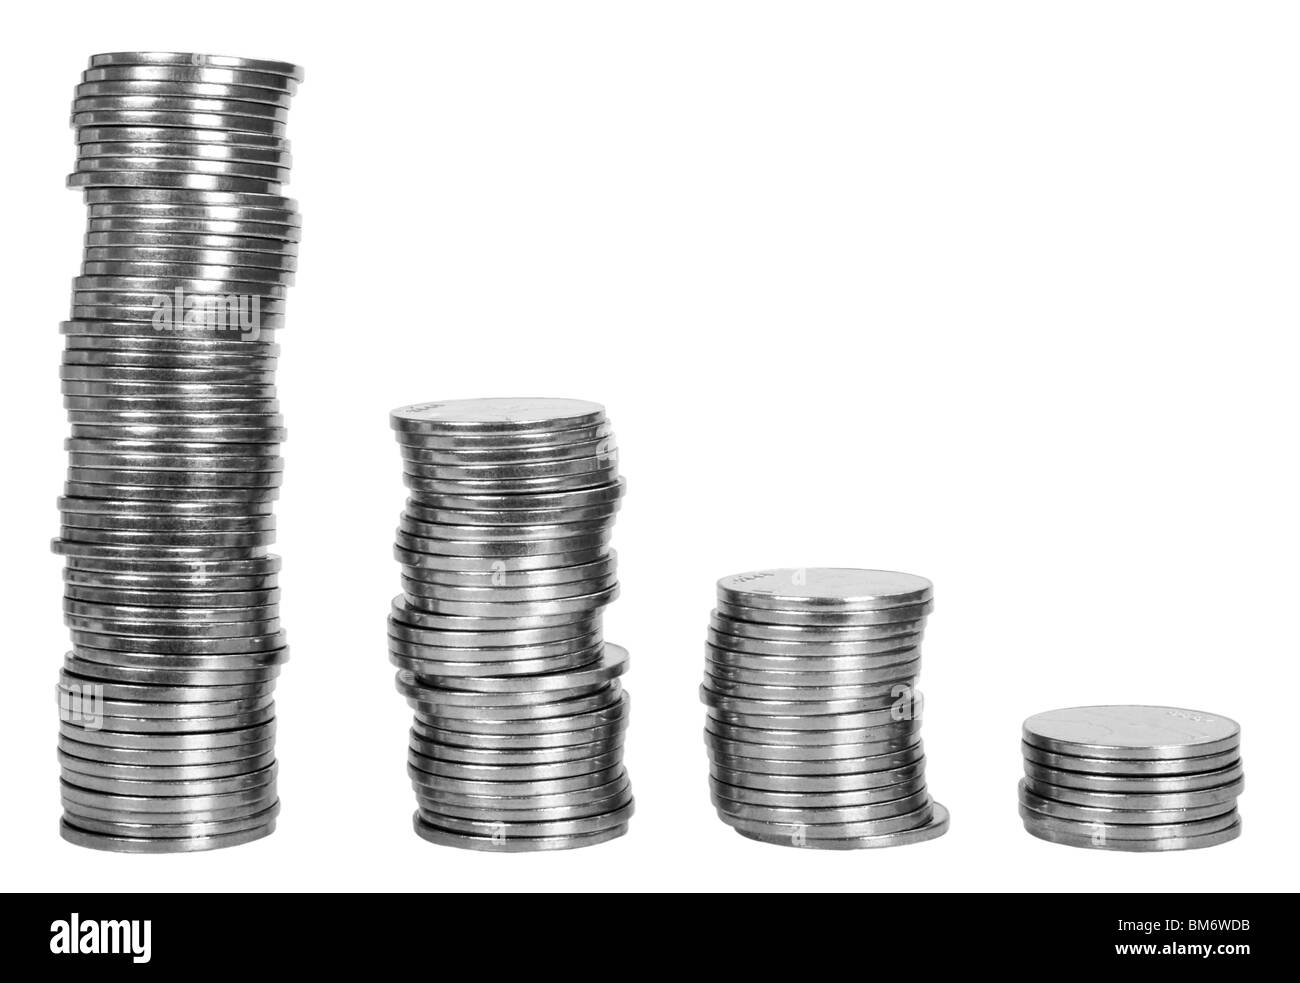 Stacks of coins in decreasing order Stock Photo